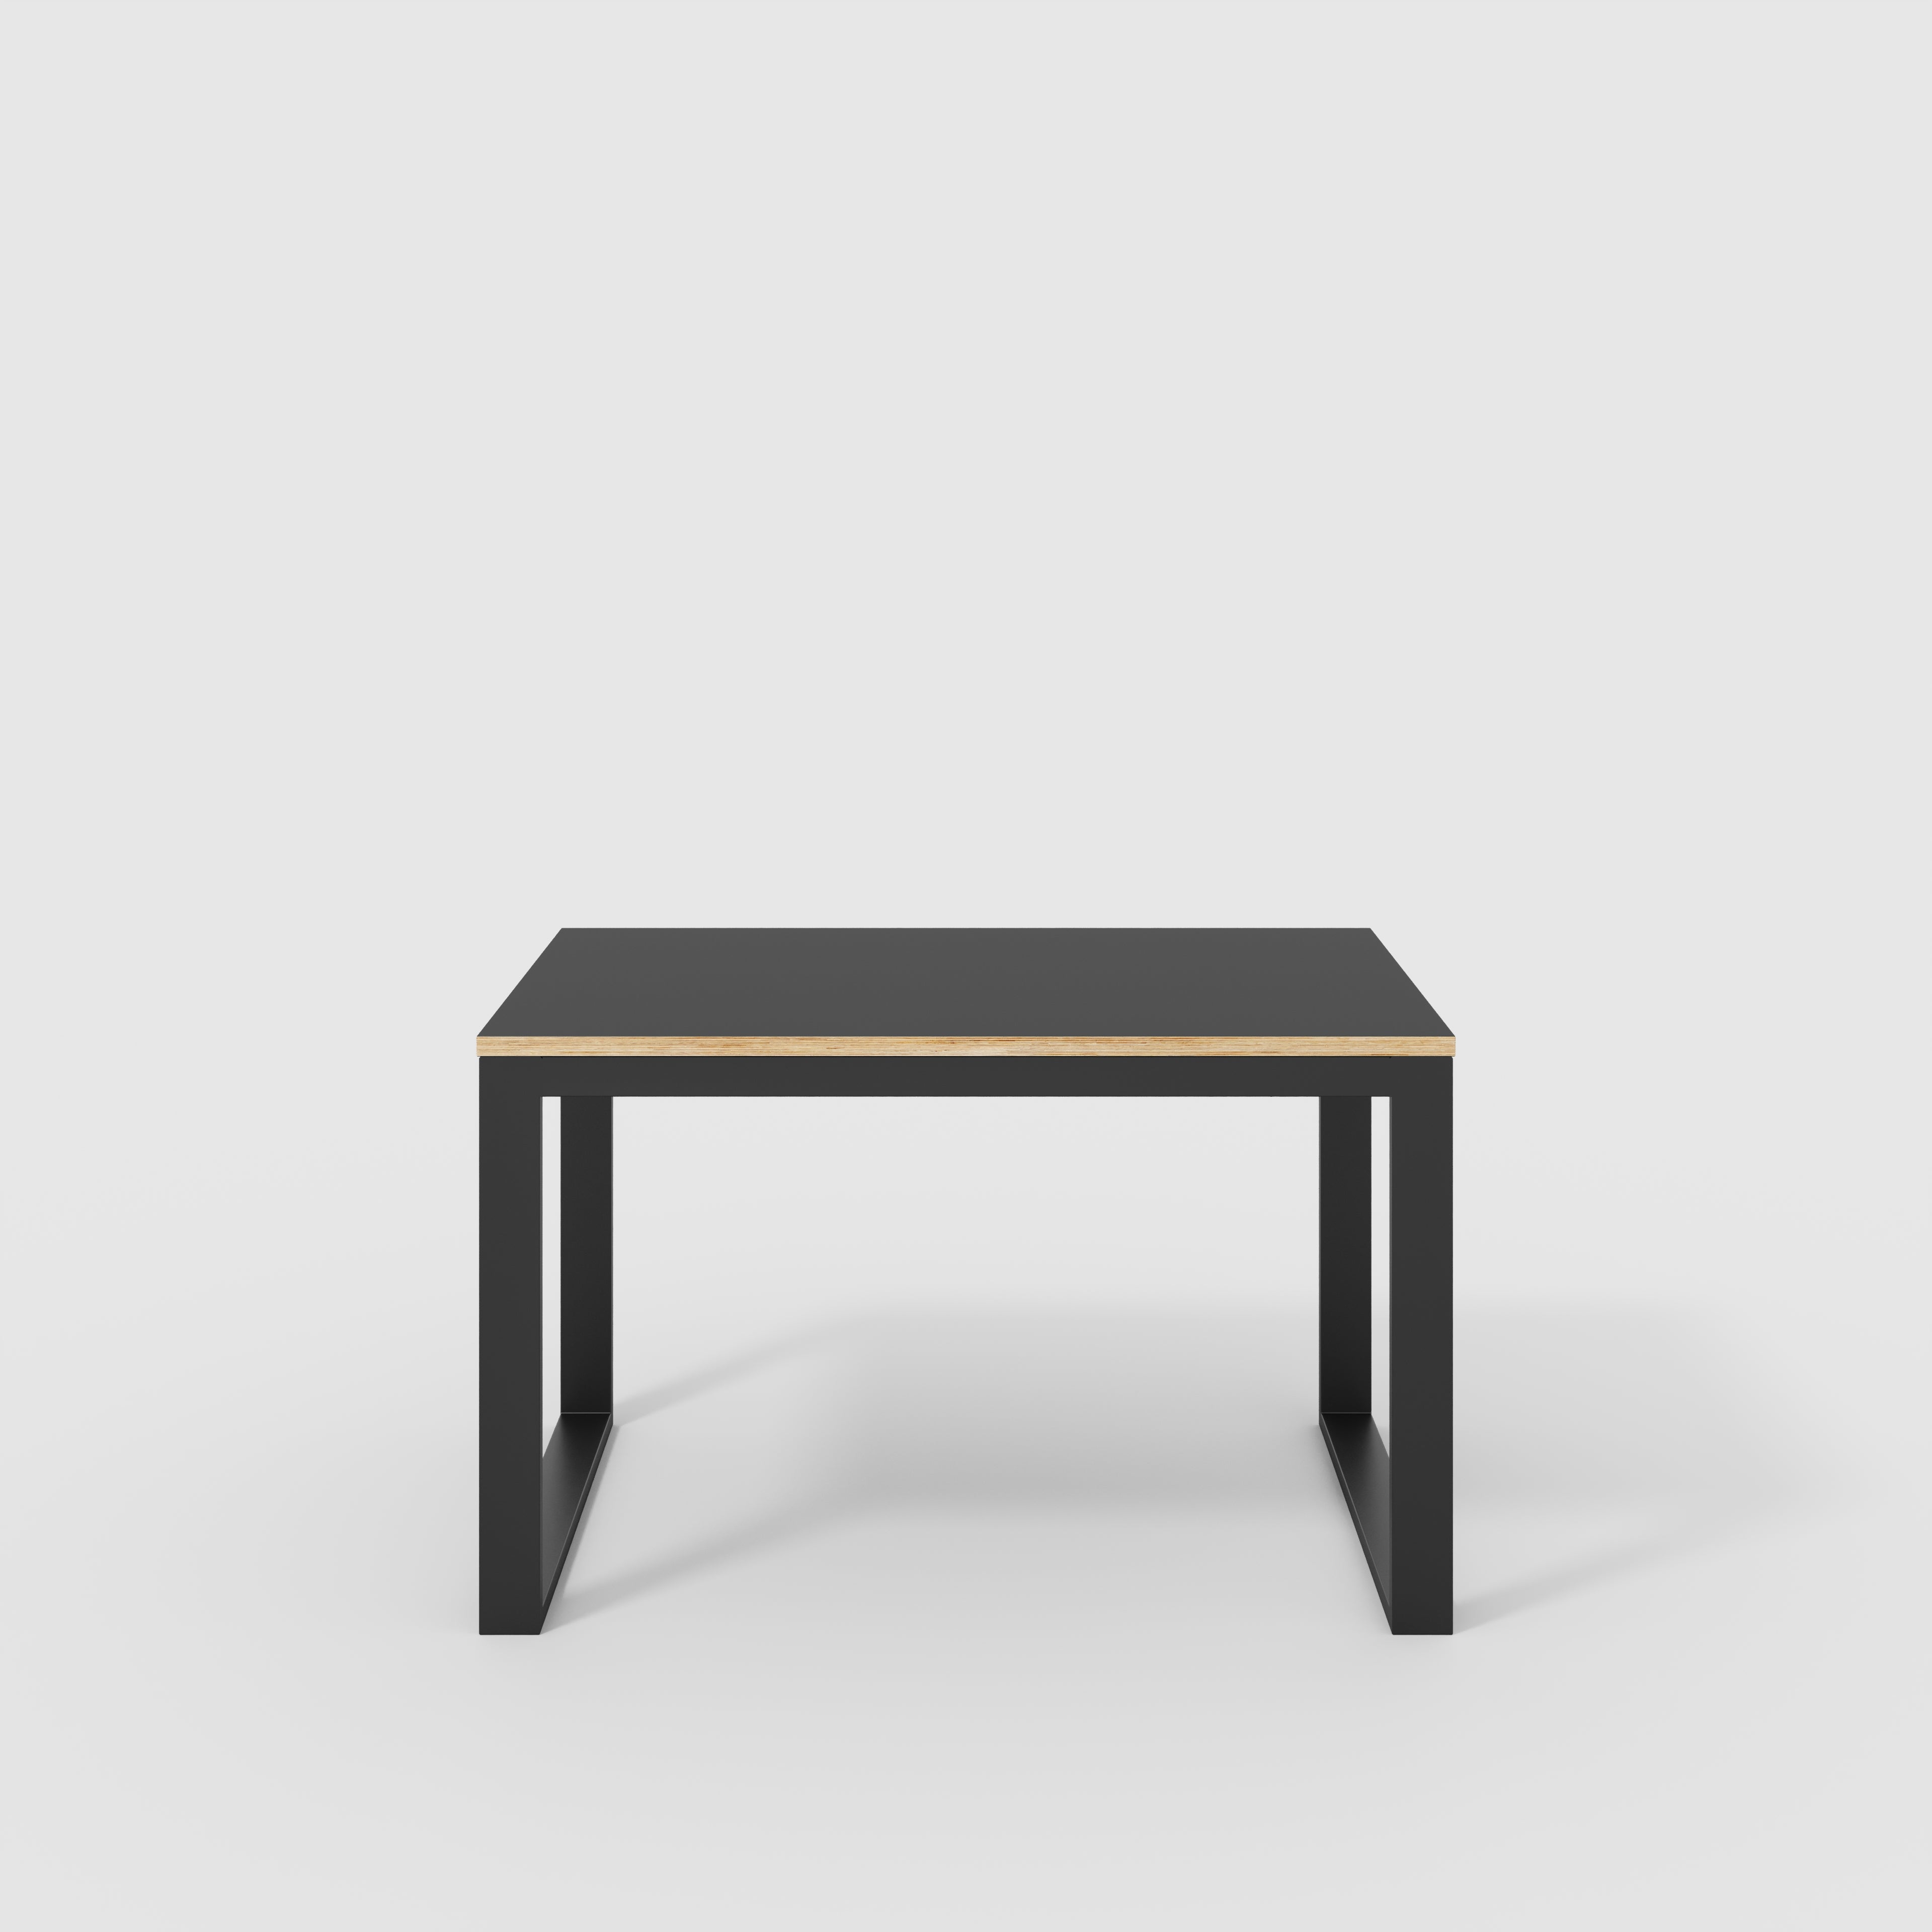 Table with Black Industrial Frame - Formica Diamond Black - 1200(w) x 745(d) x 735(h)